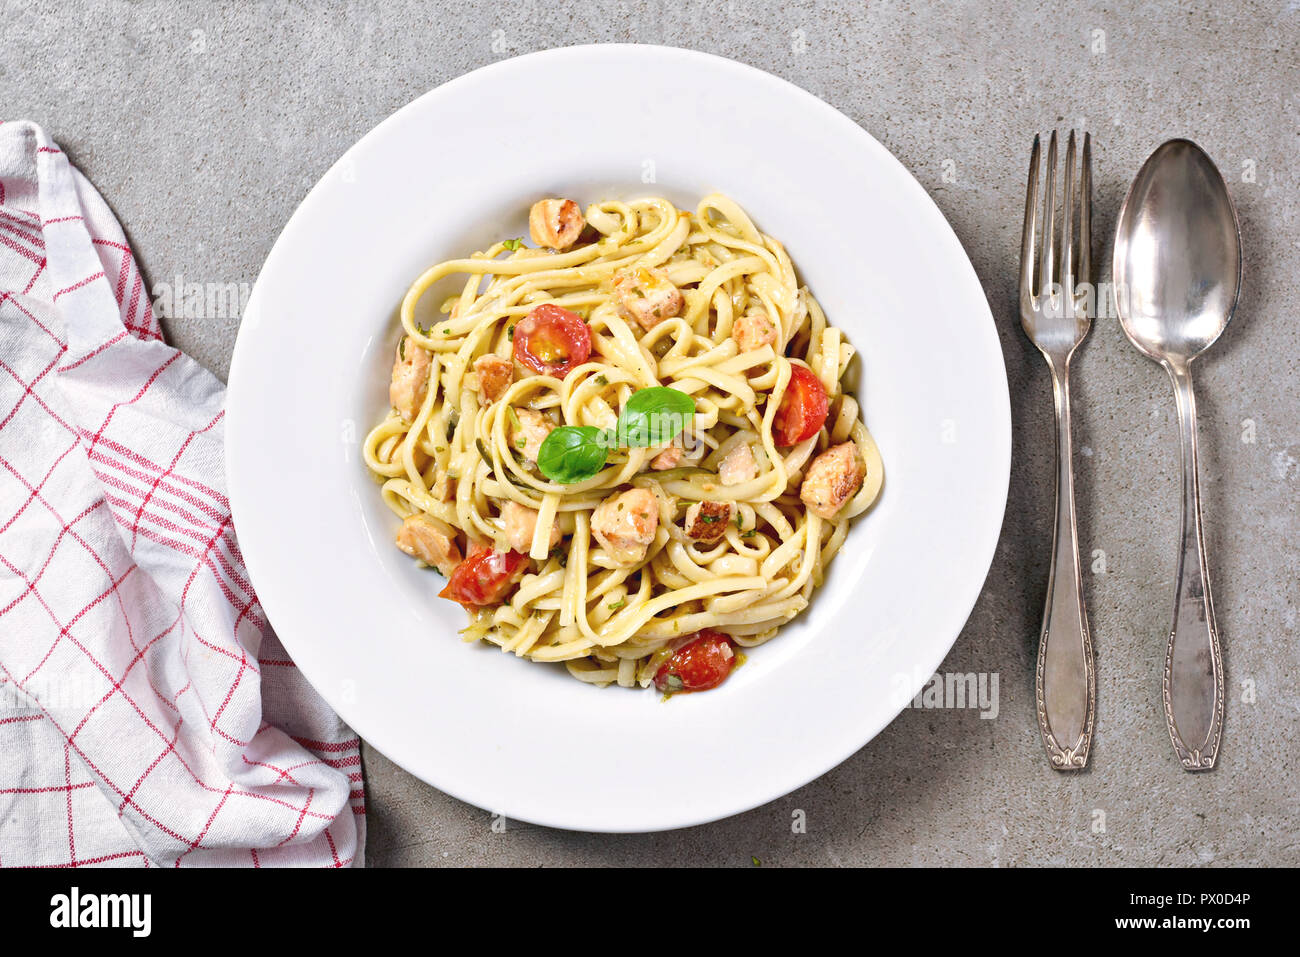 Delicious salmon pasta dish, tagliatelle or linguine noodles. High angle view of fresh spaghetti pasta with herbs and cherry tomatoes. Stock Photo